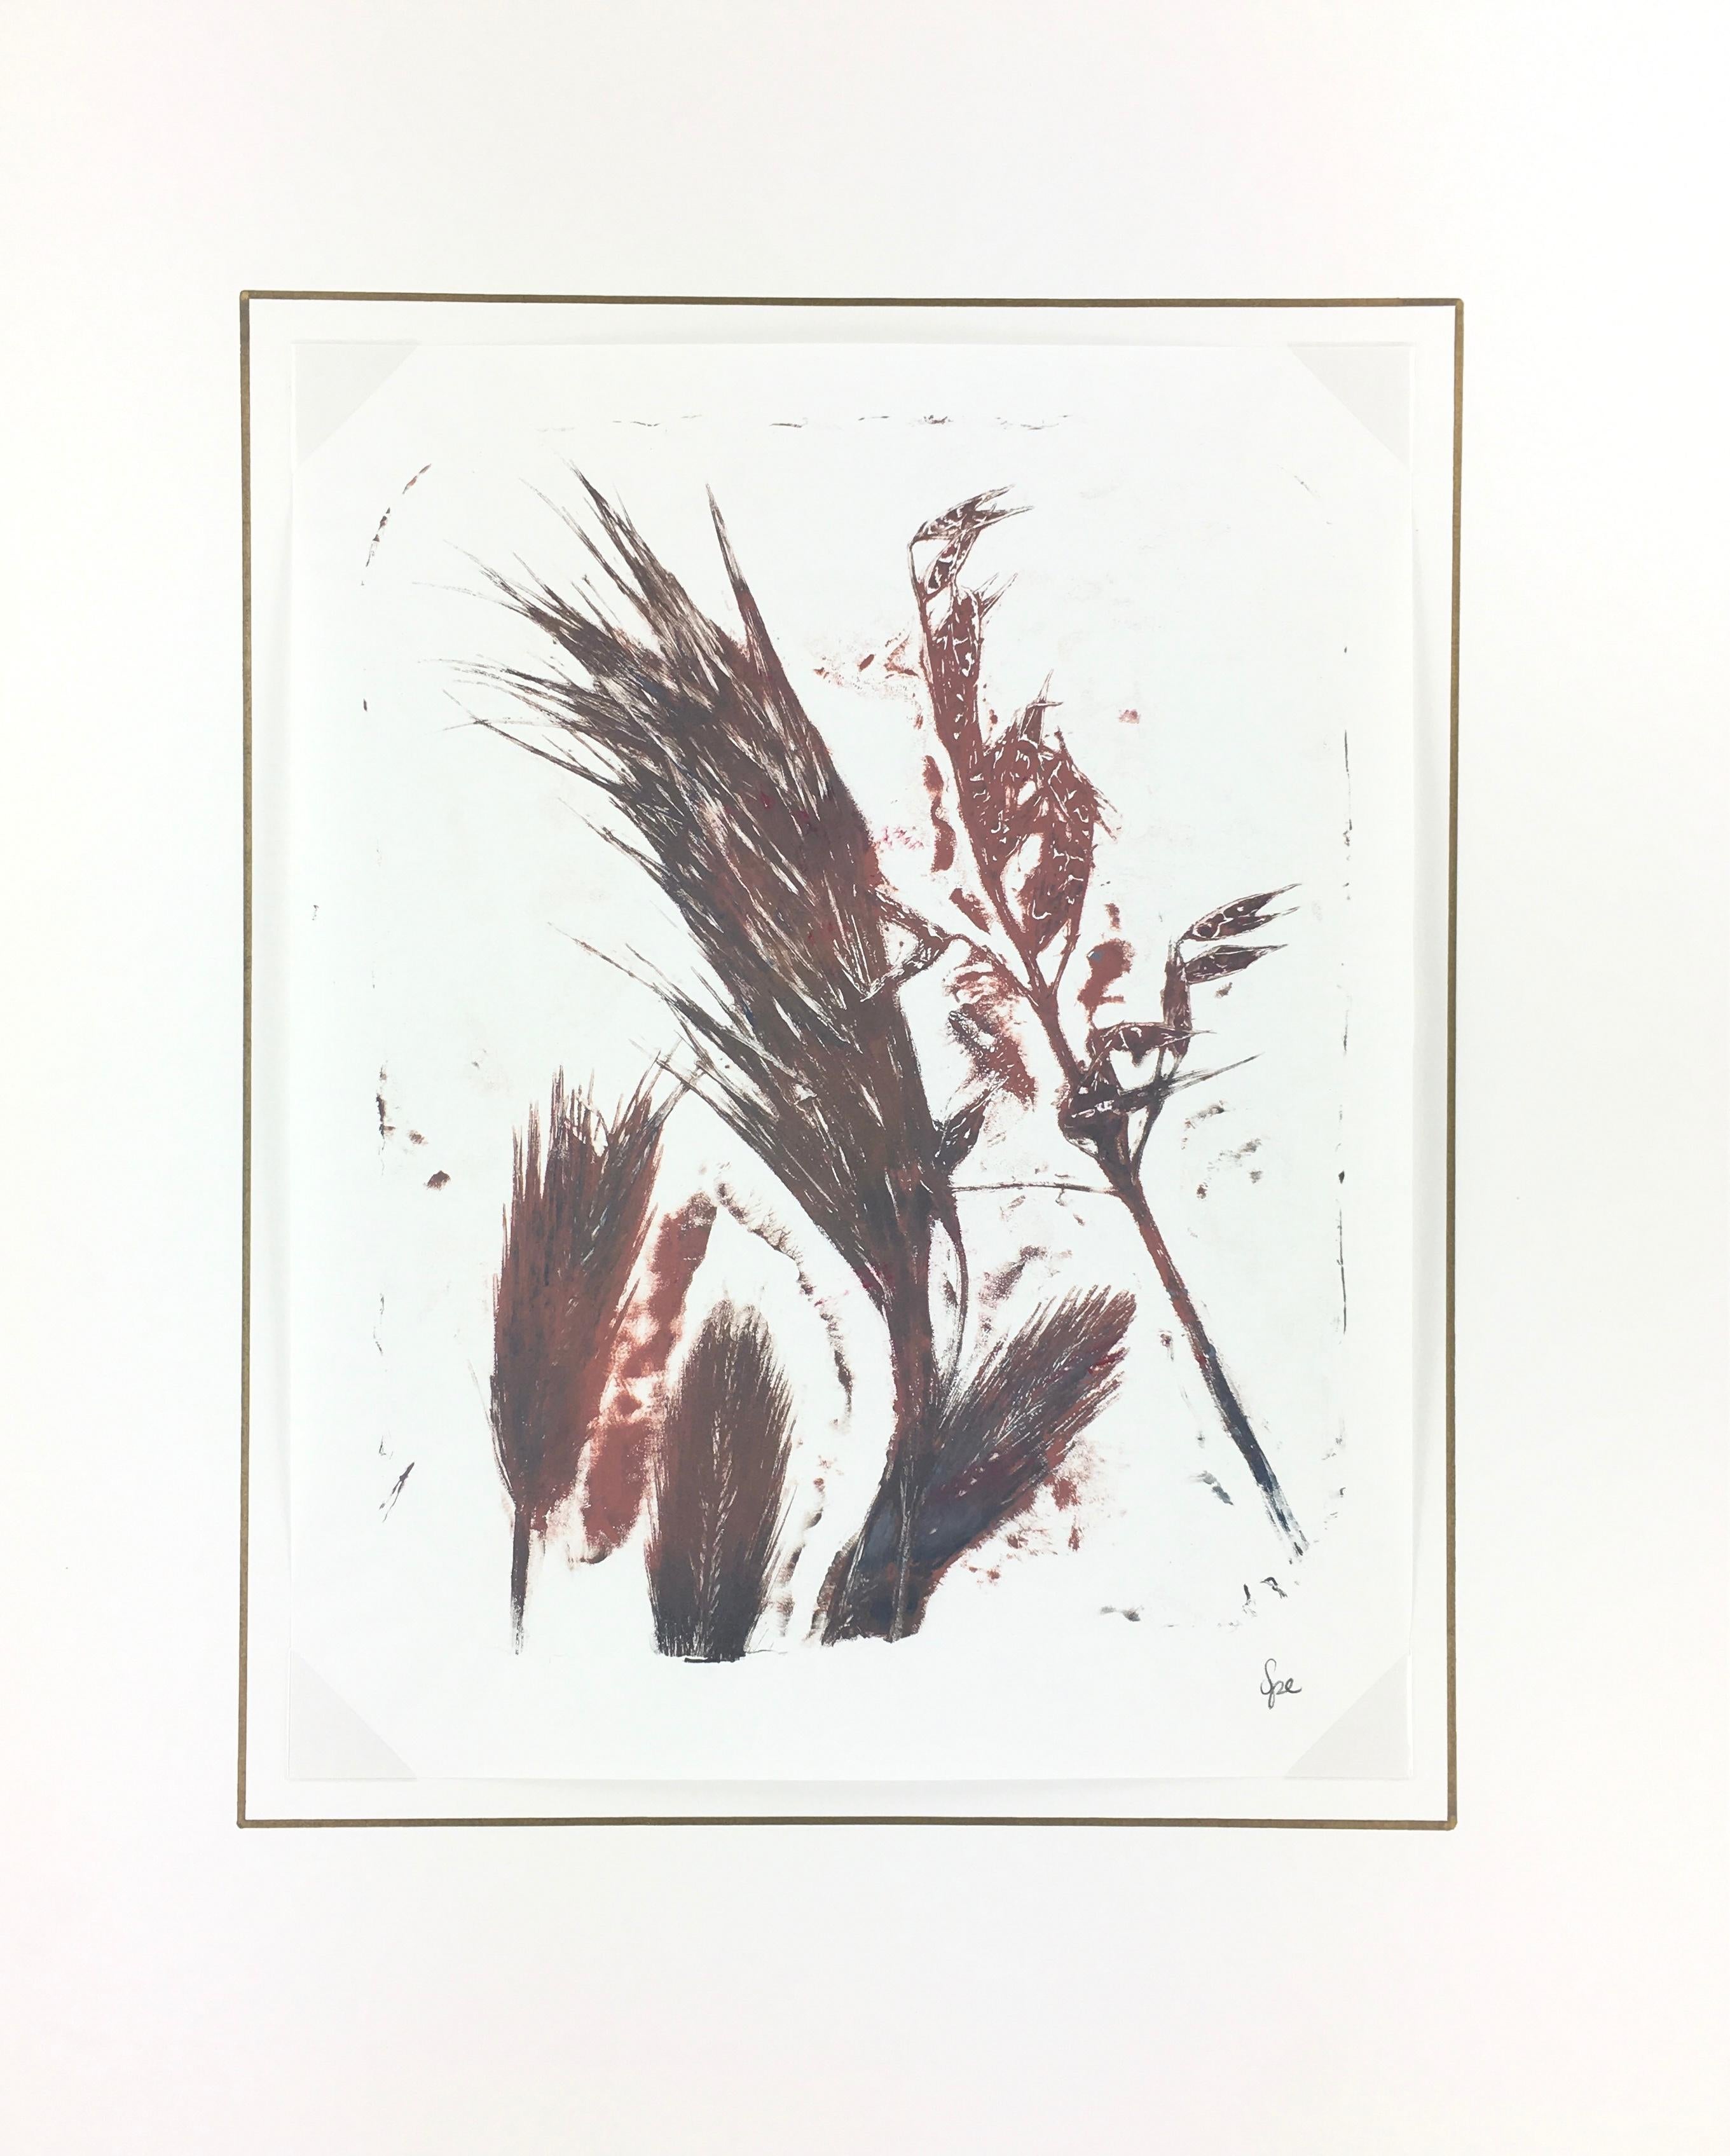 Modern abstract painting of grass and leaves in browns and reds by artist Spe, 2013. Signed lower right.  

Original artwork on paper displayed on a white mat with a gold border. Mat fits a standard-size frame.  Archival plastic sleeve and